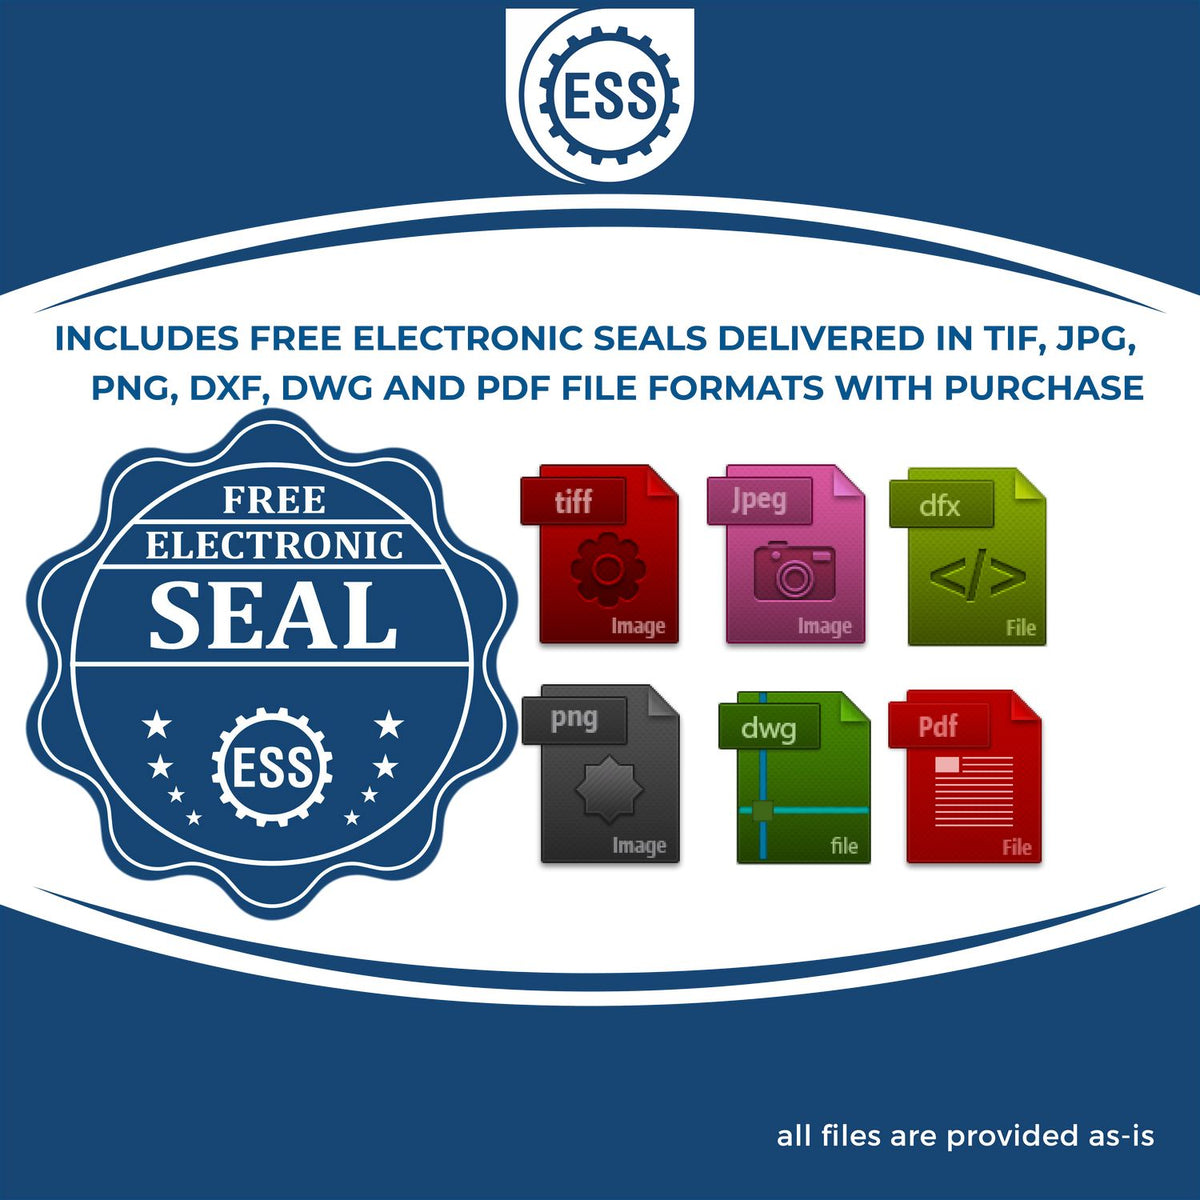 An infographic for the free electronic seal for the Self-Inking Illinois Geologist Stamp illustrating the different file type icons such as DXF, DWG, TIF, JPG and PNG.